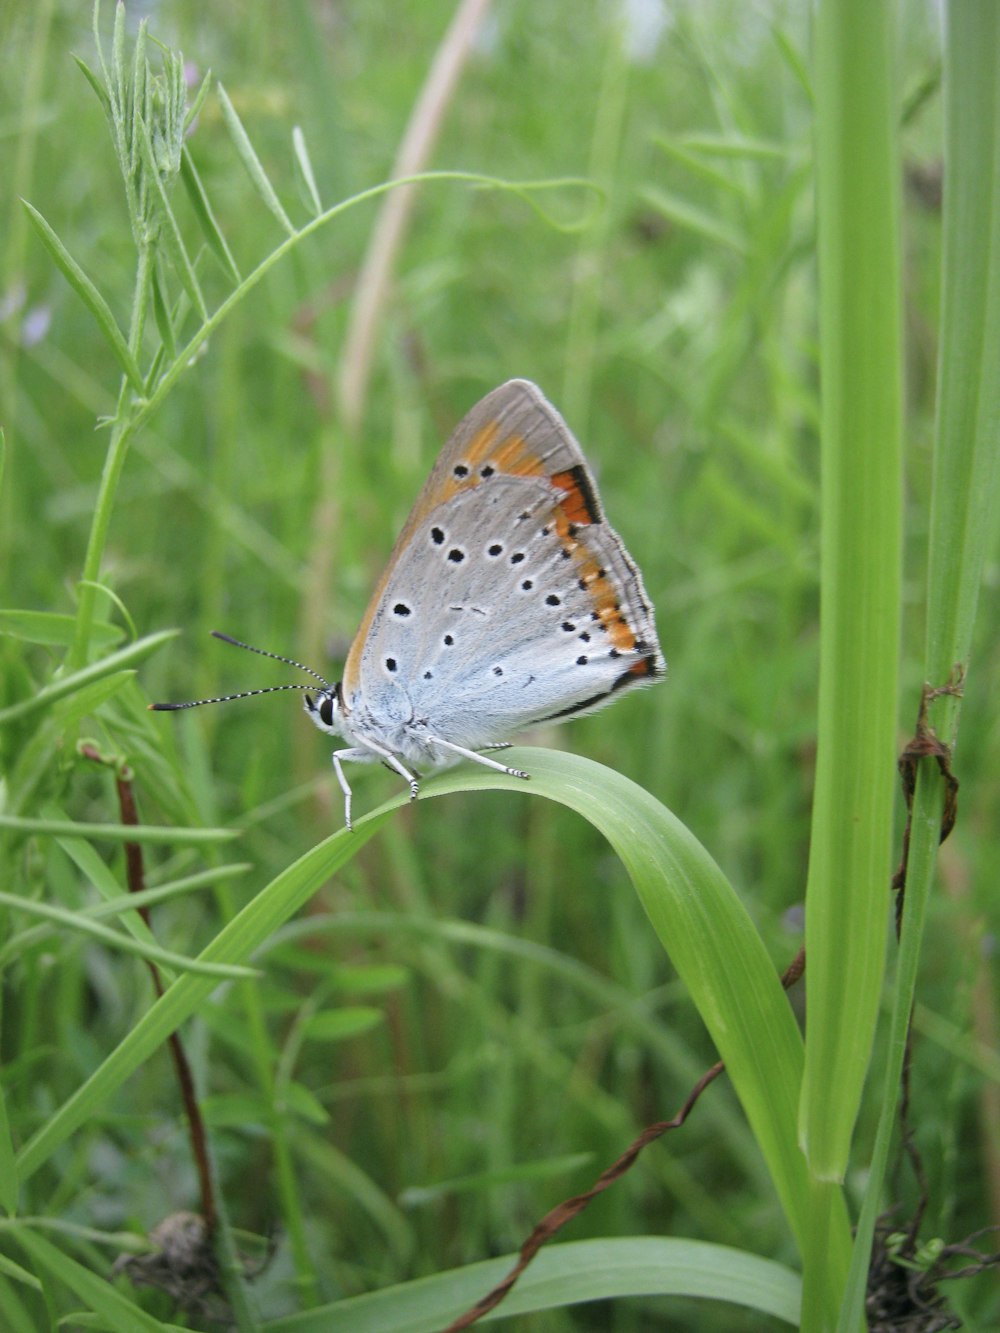 brown and white butterfly on green grass during daytime